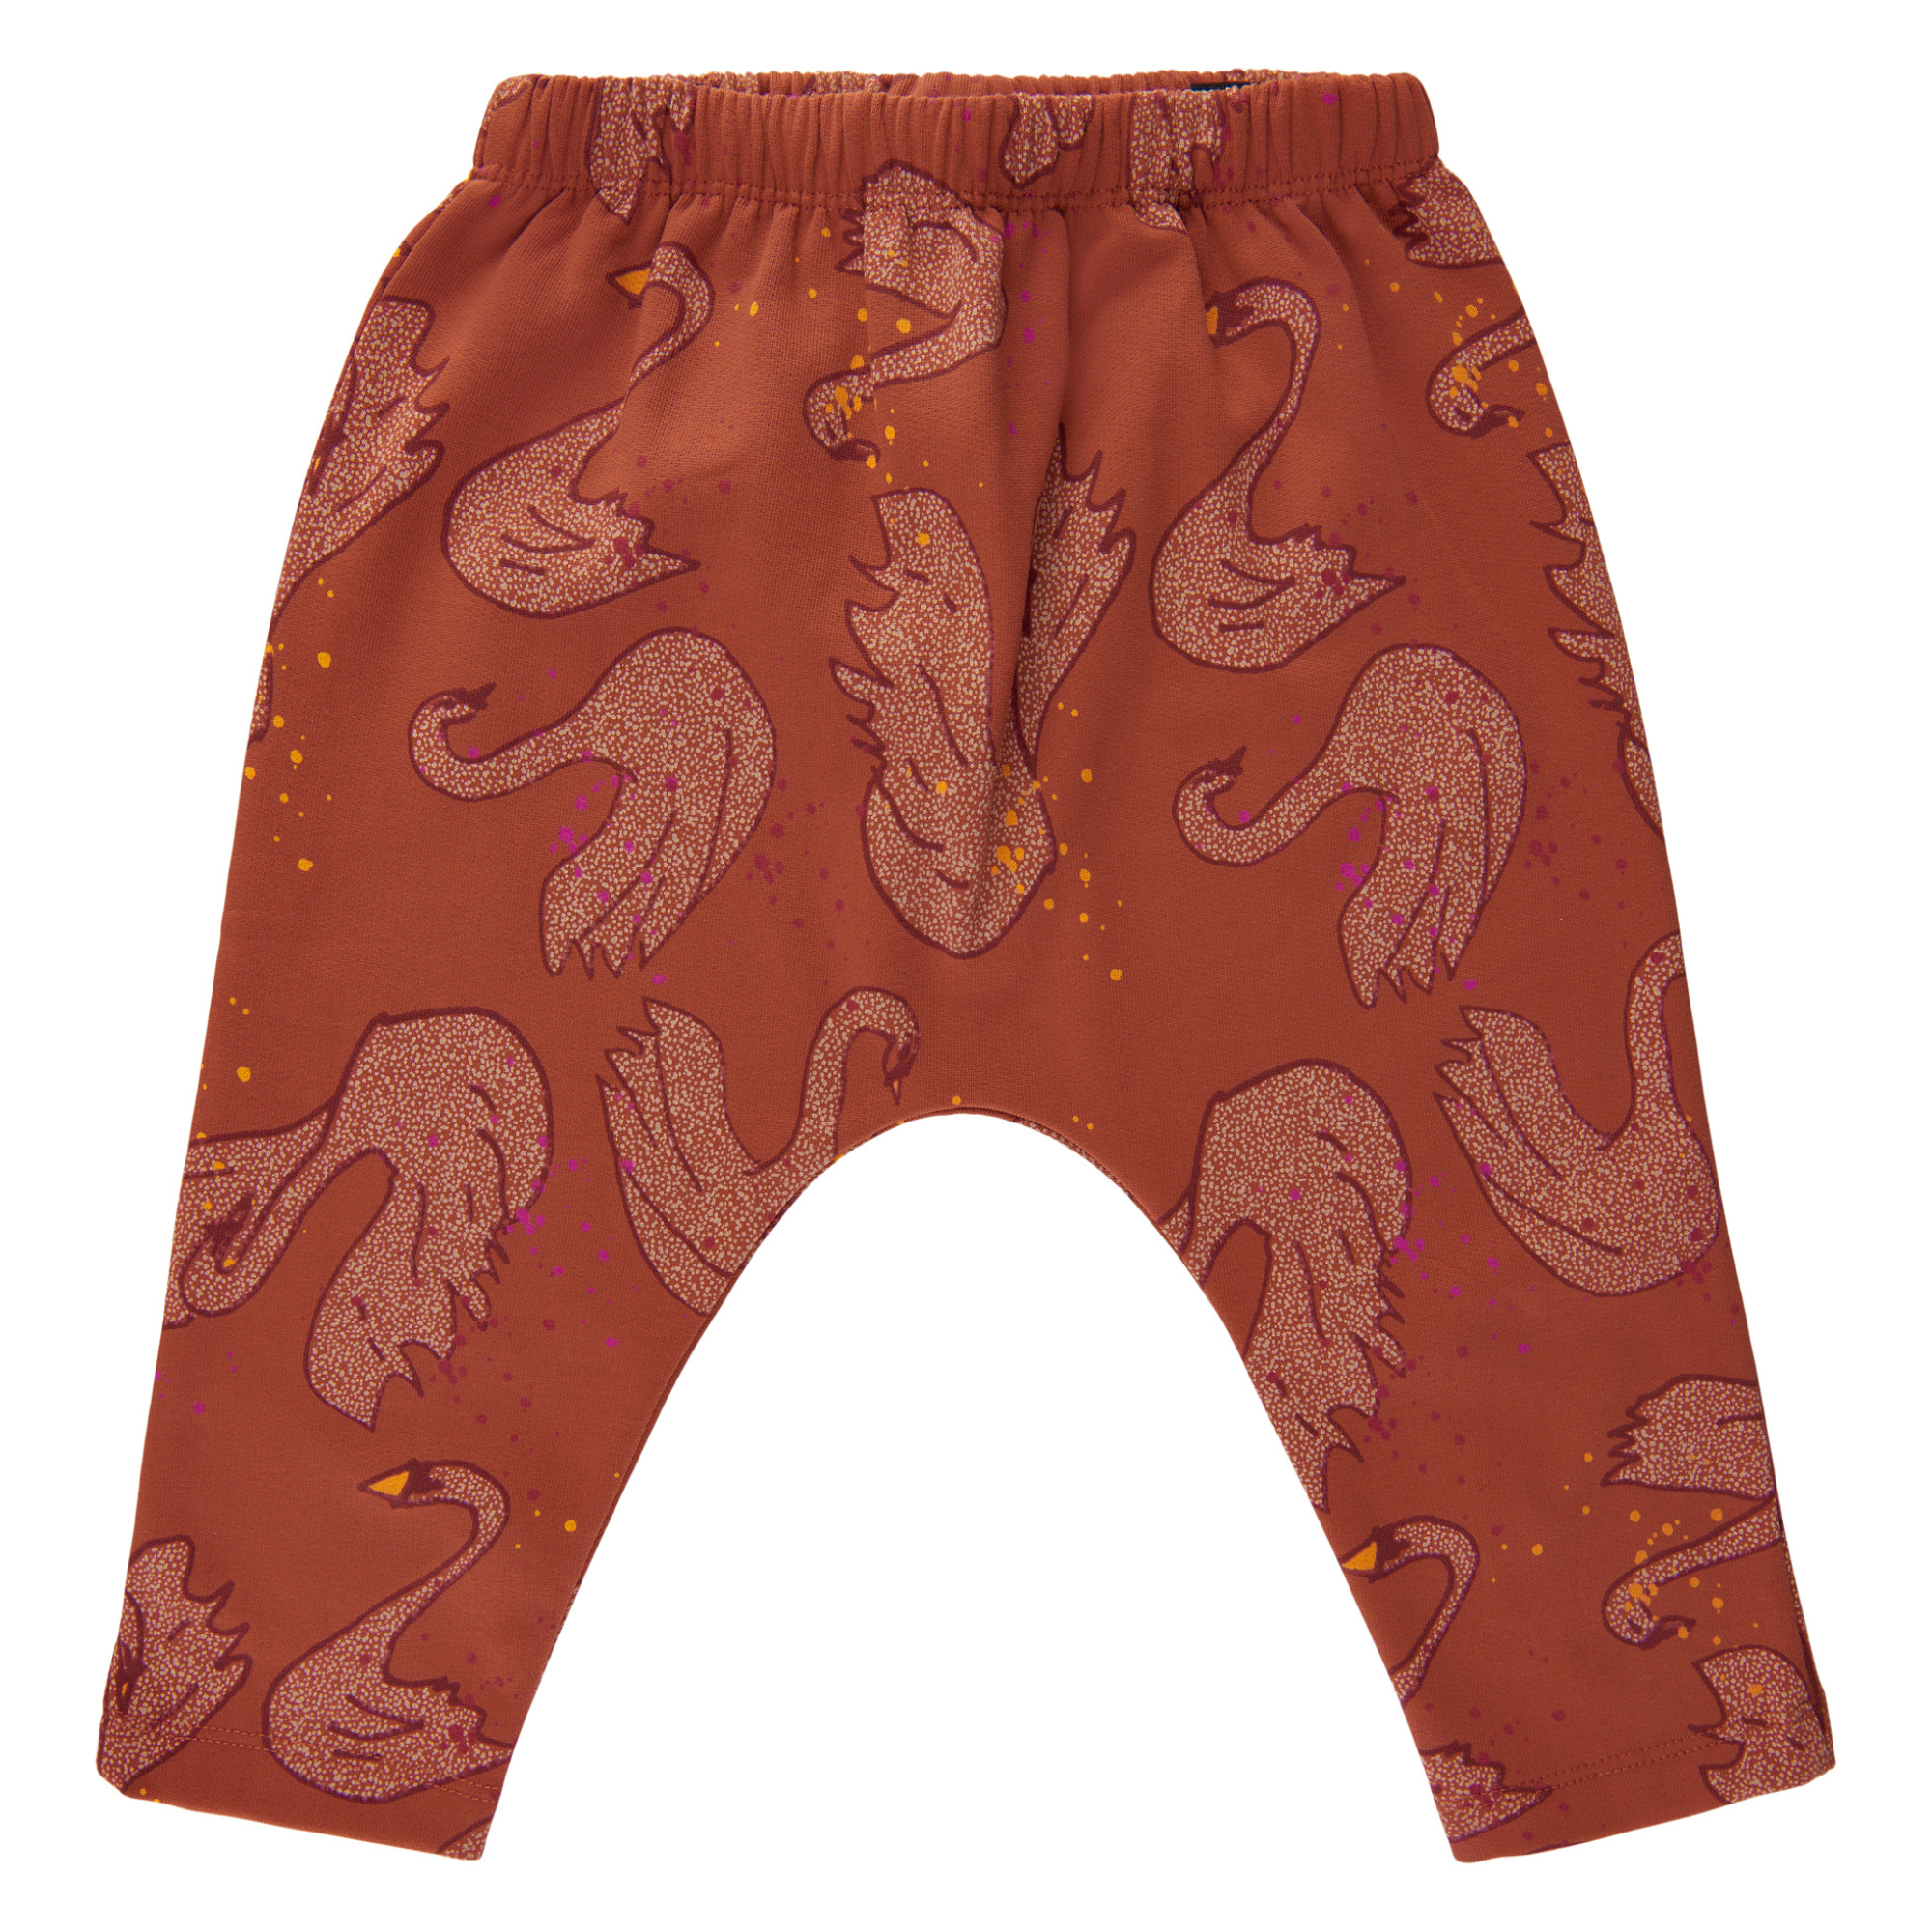 Soft Gallery - Faura Swan Pants, SG2279 - Baked Clay